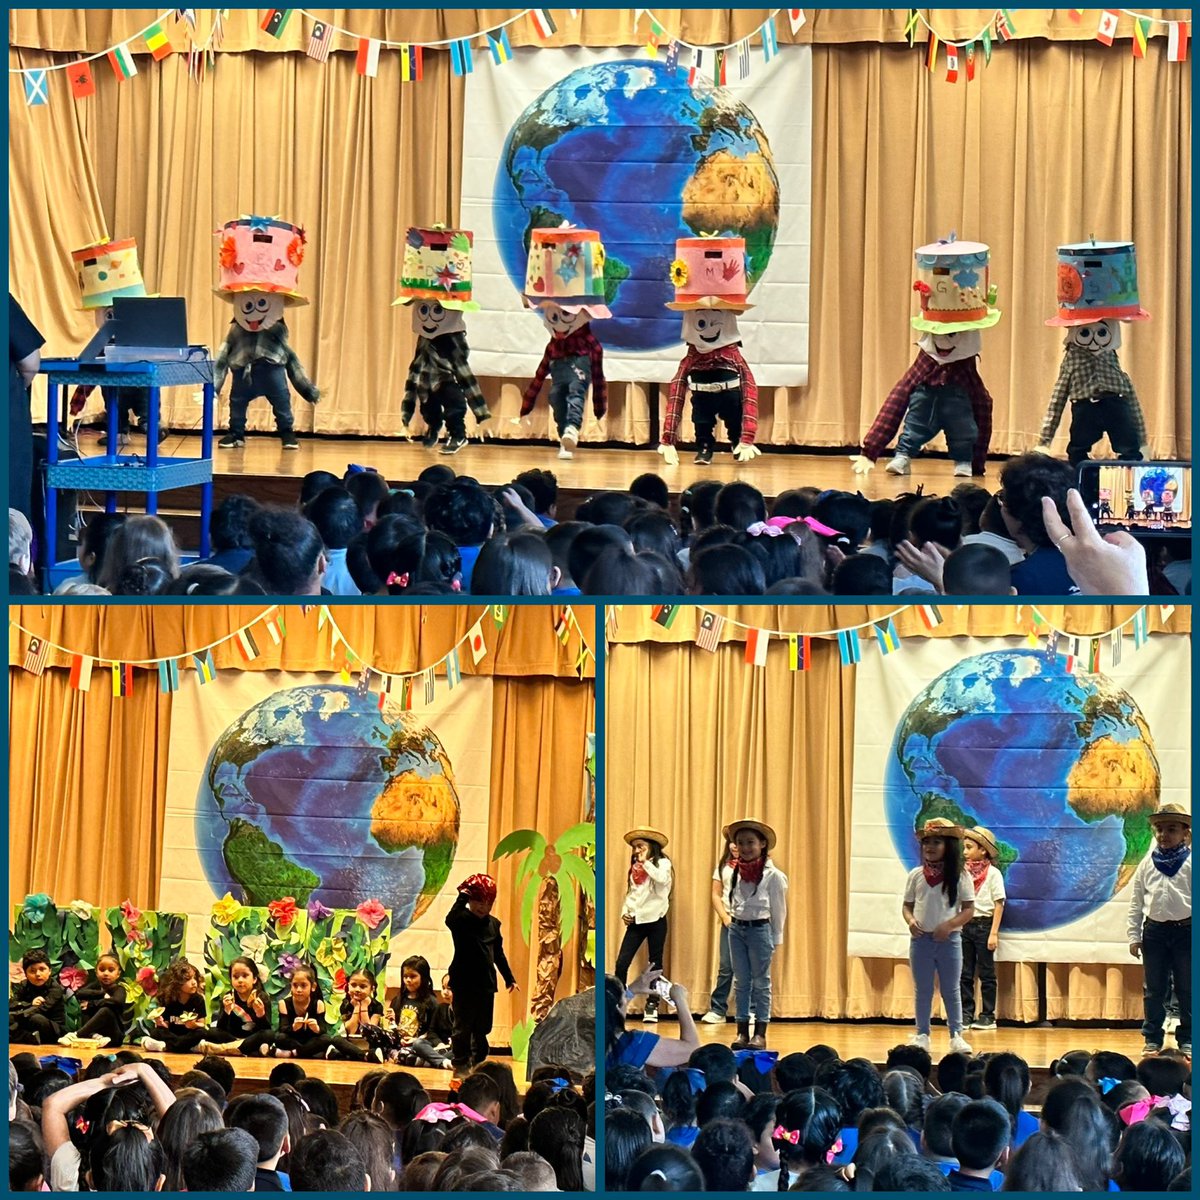 @JHaleyBulldogs Cultural Explosion!! So proud of these students and teachers for all of their hard work. Every performance was a beautiful representation of various cultures!!